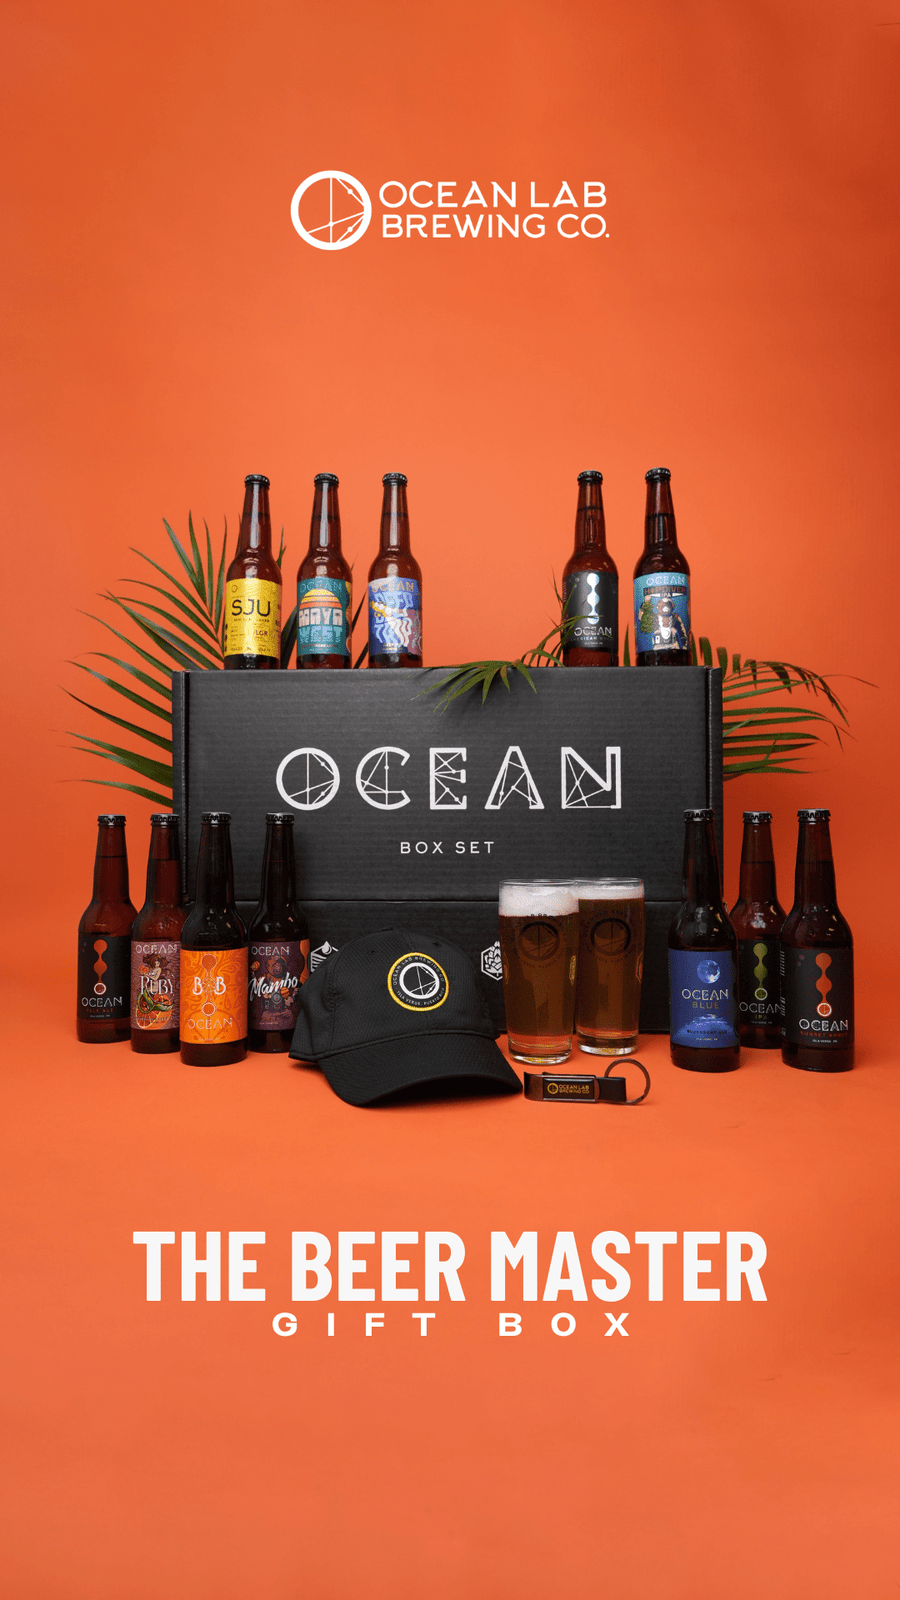 The Beer Master Gift Box